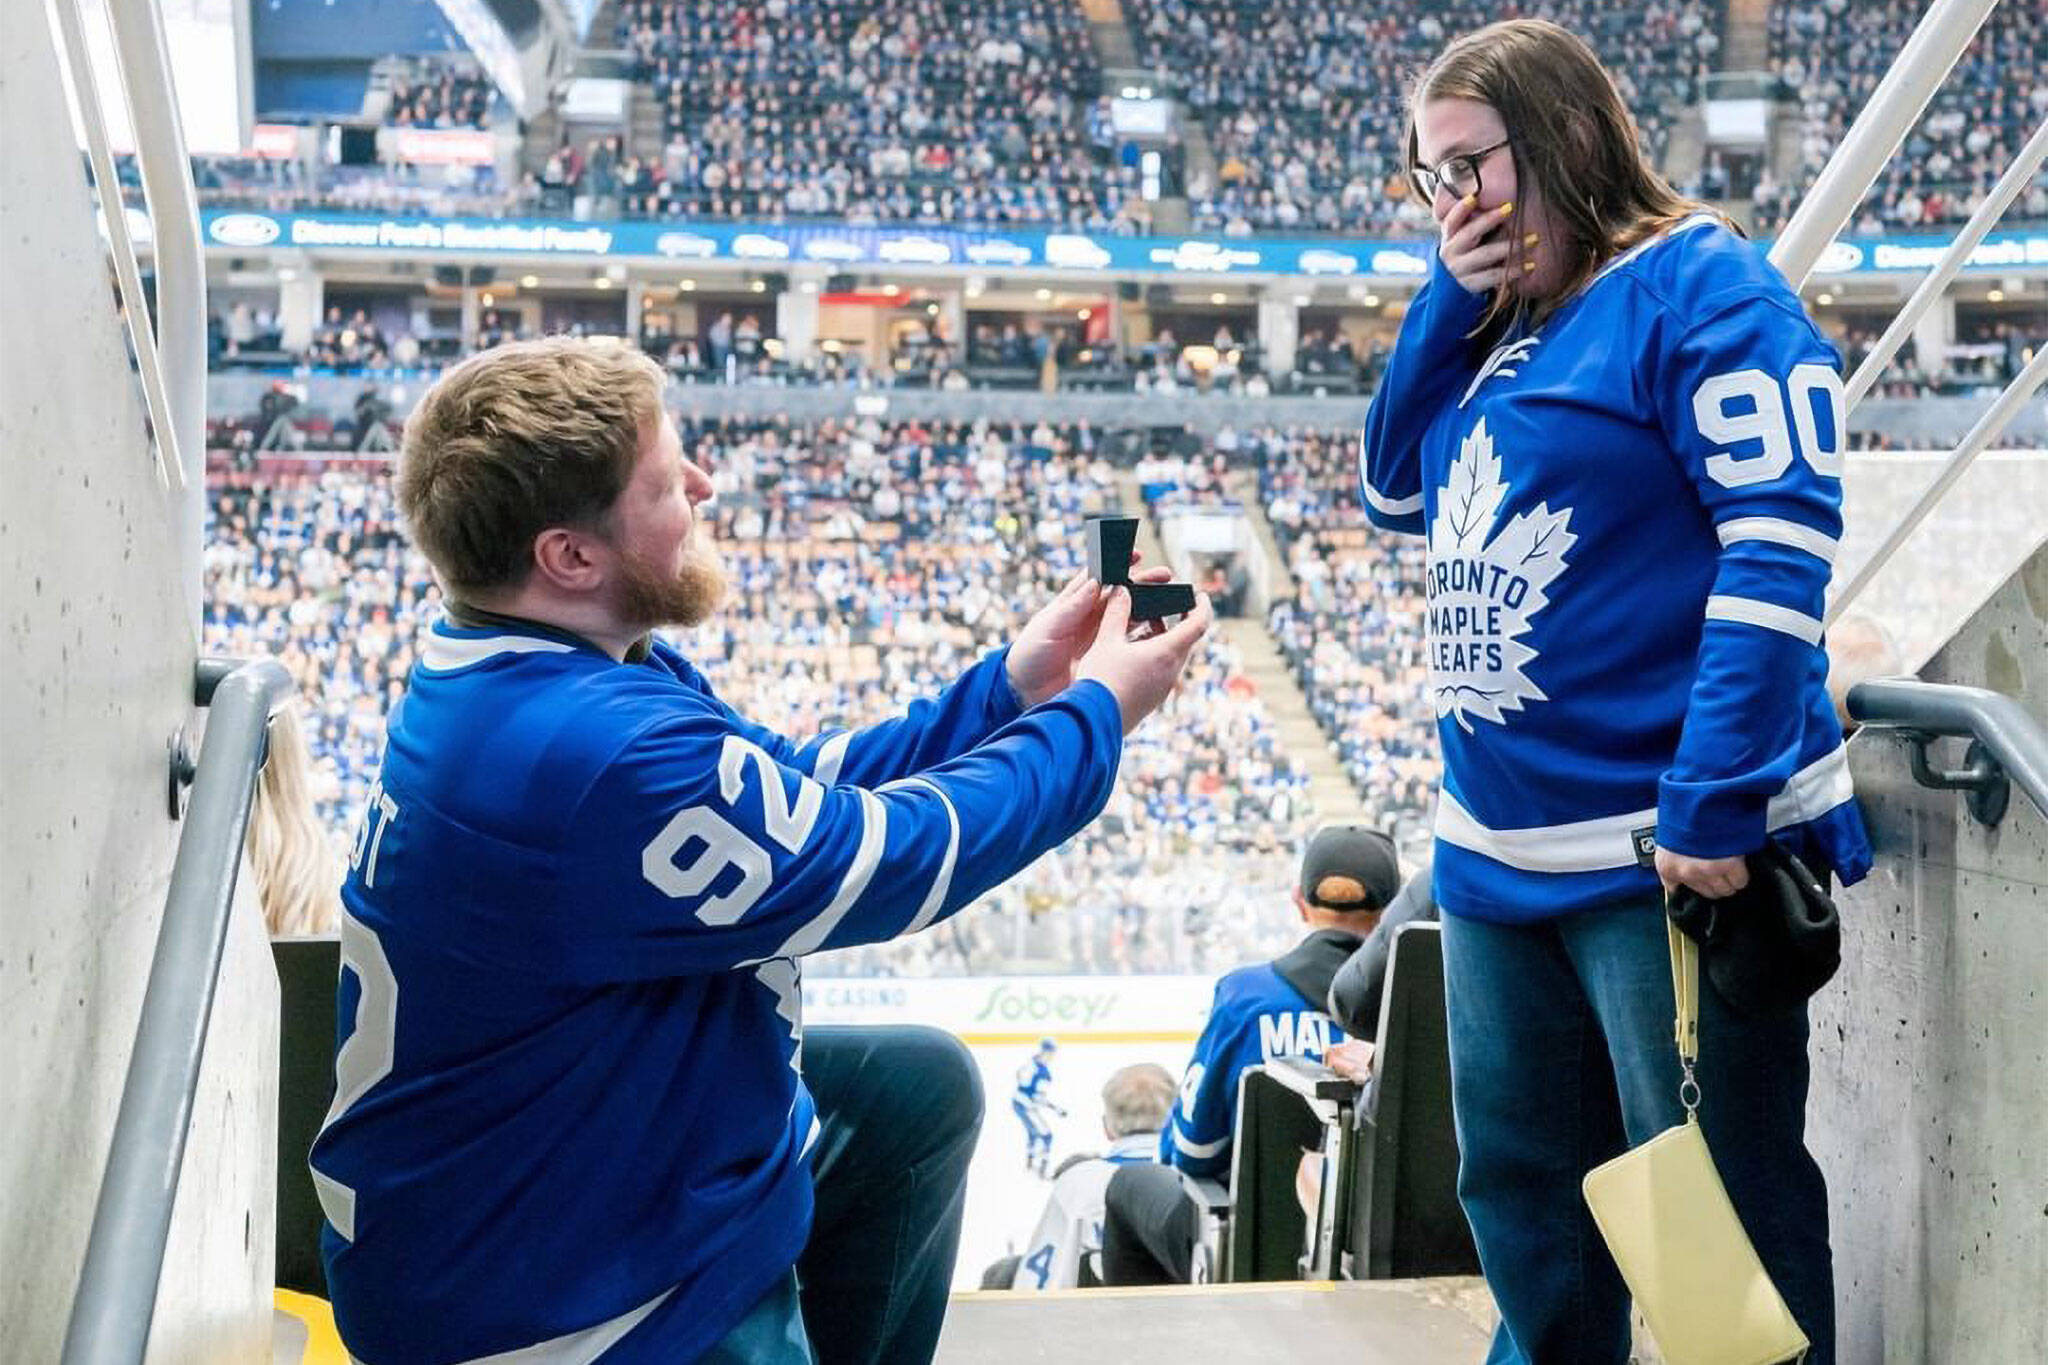 Toronto Maple Leafs: The Next Generation of Fans